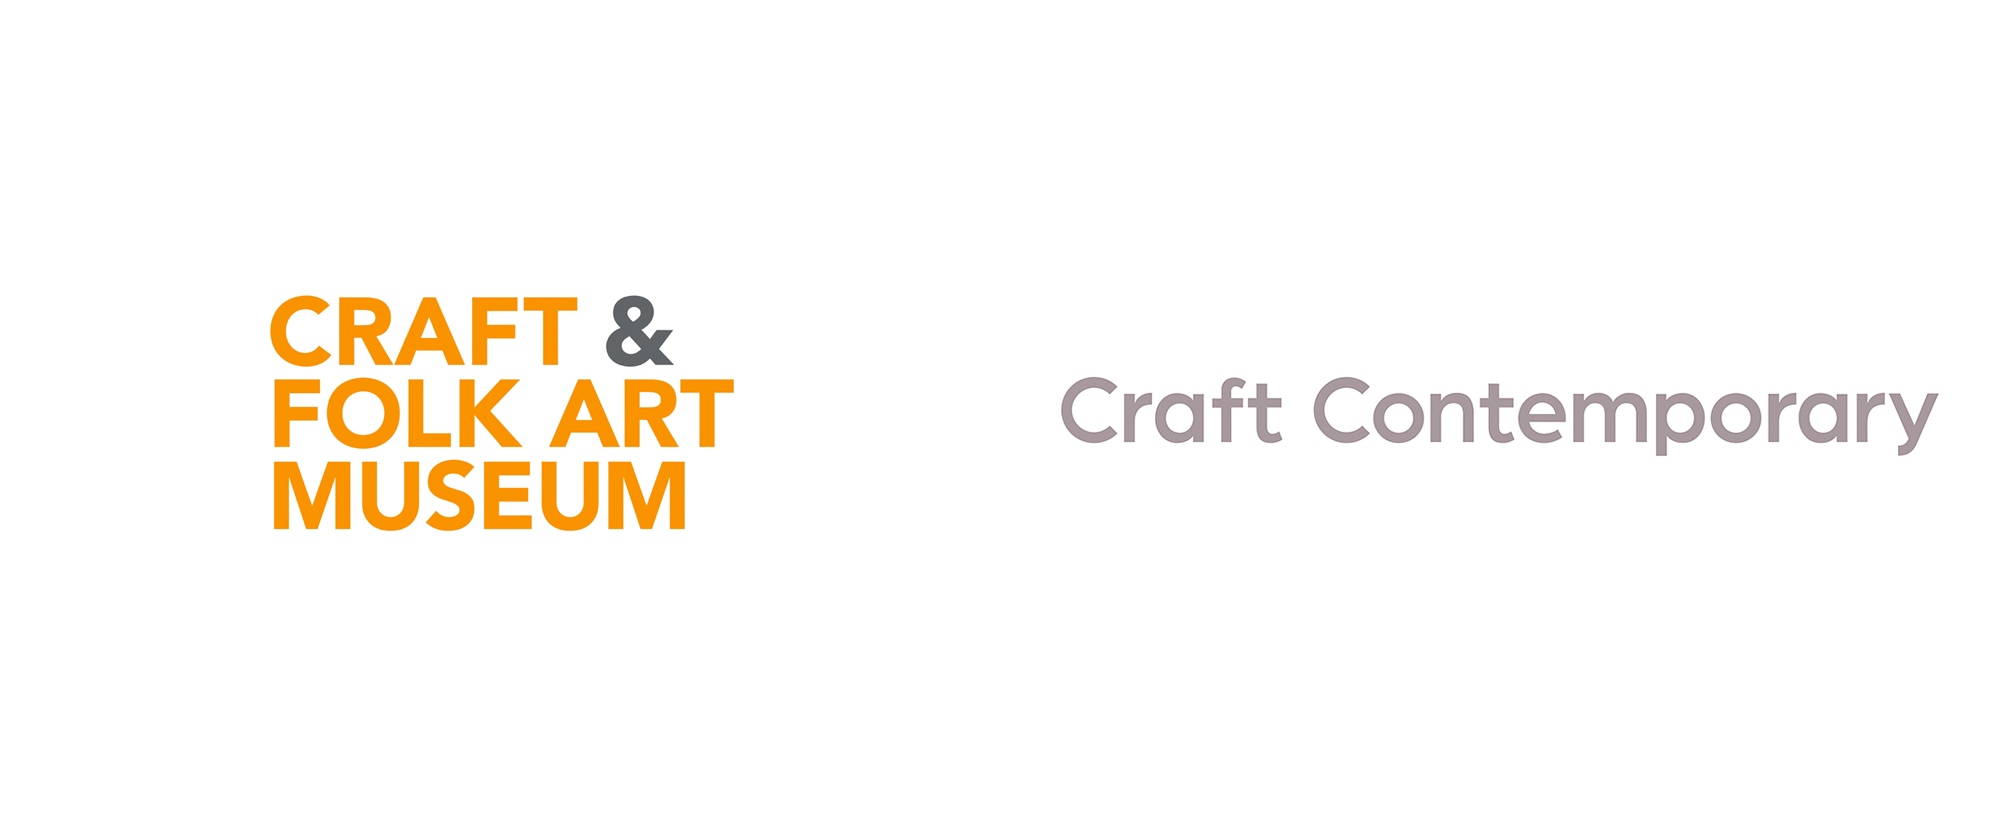 New Name, Logo, and Identity for Craft Contemporary by Siegel+Gale